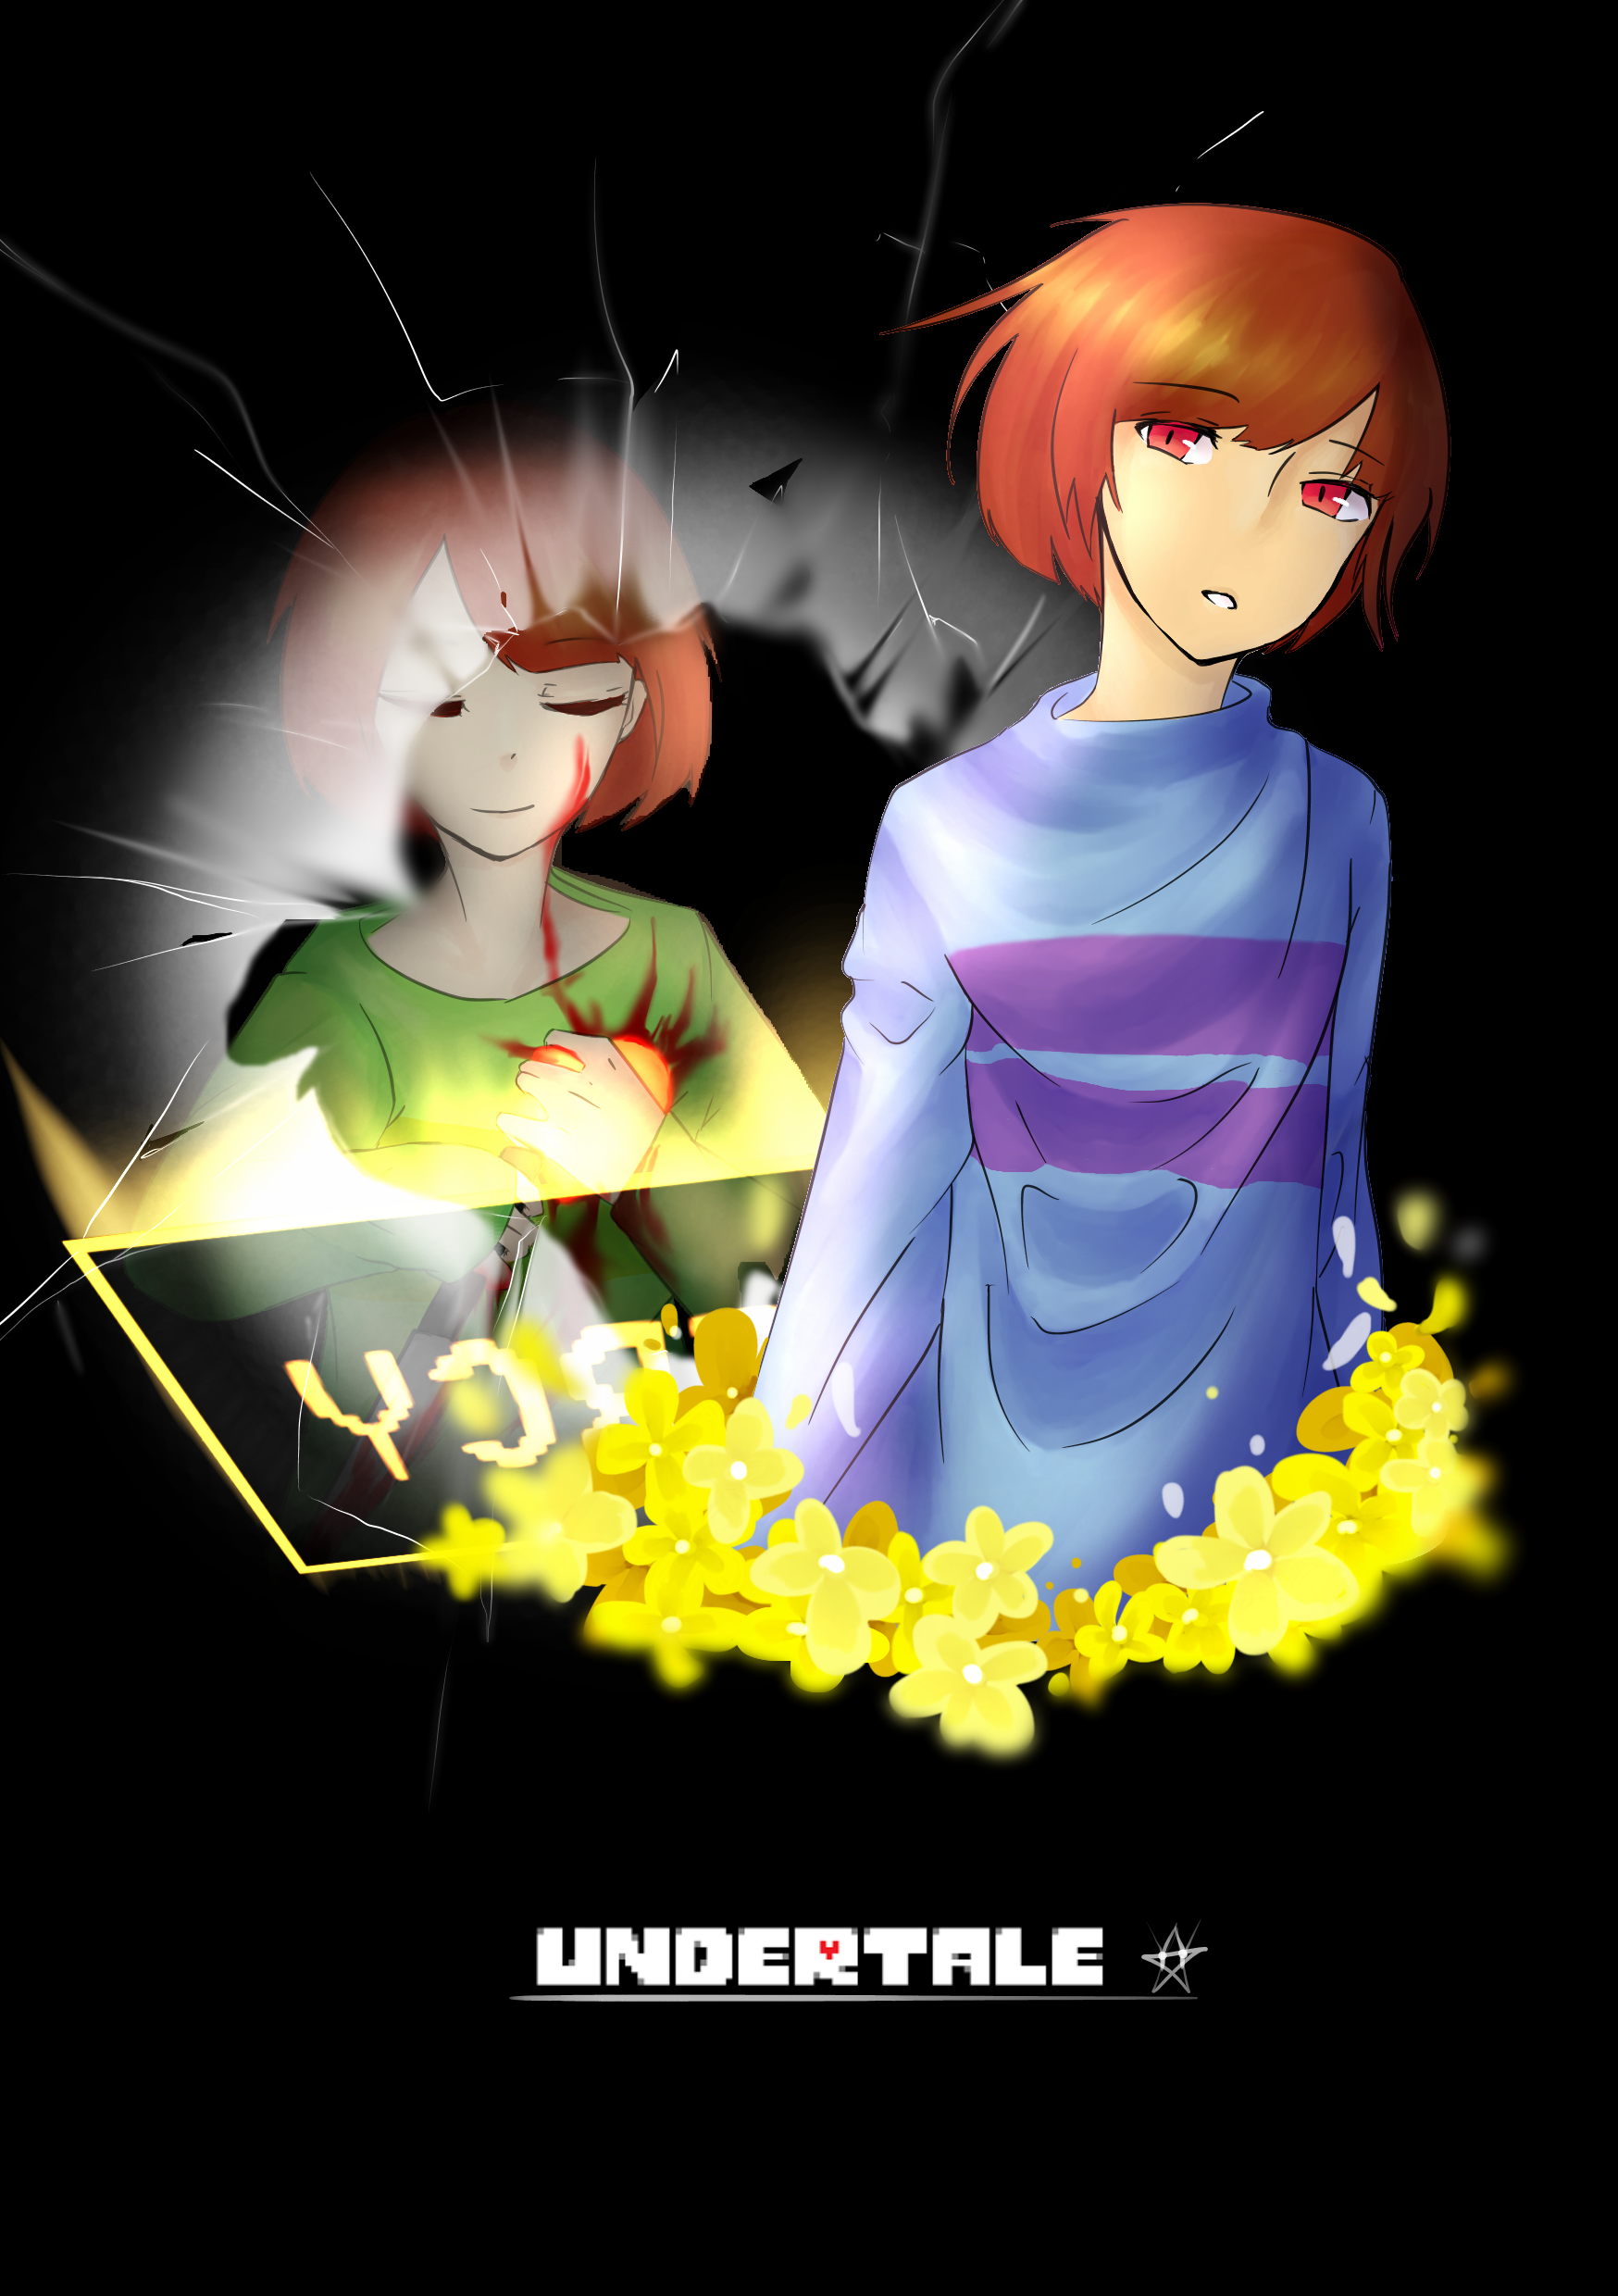 Undertale - Frisk and Chara by TinyMinotaur1 on DeviantArt